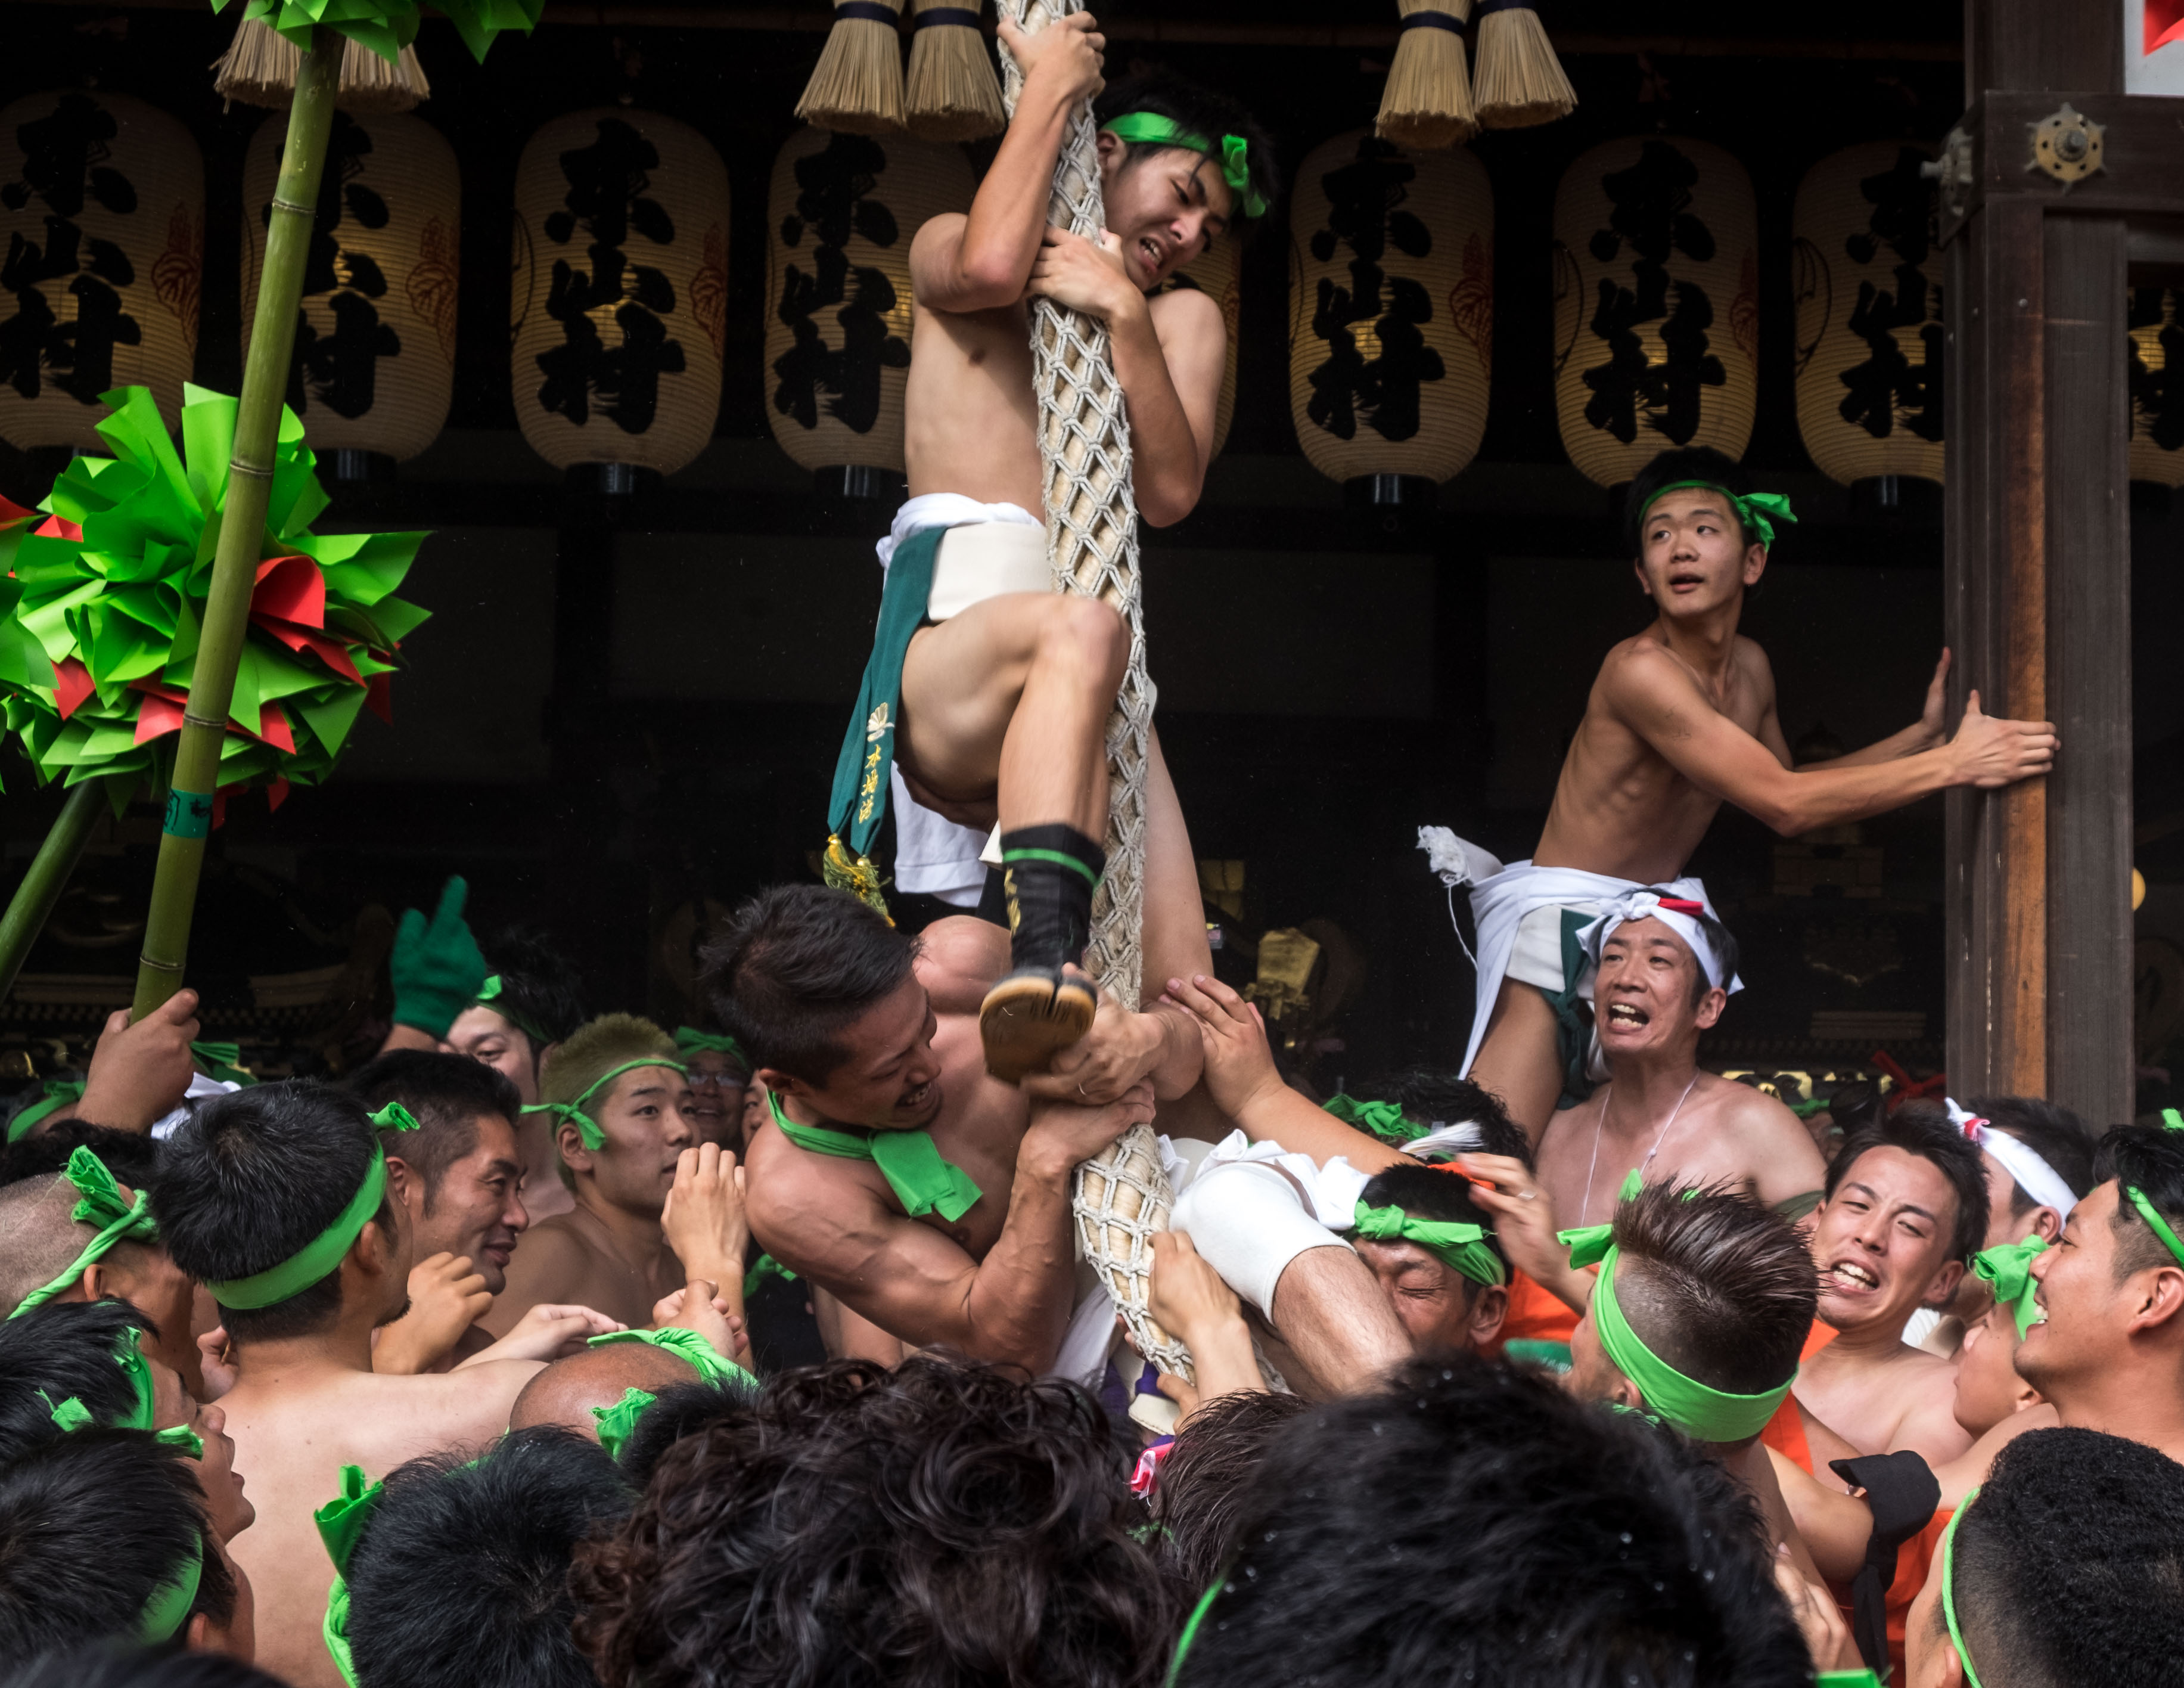 Arriving to Matsubara Hachiman Shrine, the participants try to climb the rope of the shrine to show strength and receive good luck for the dangerous battle they will fight later in the day.